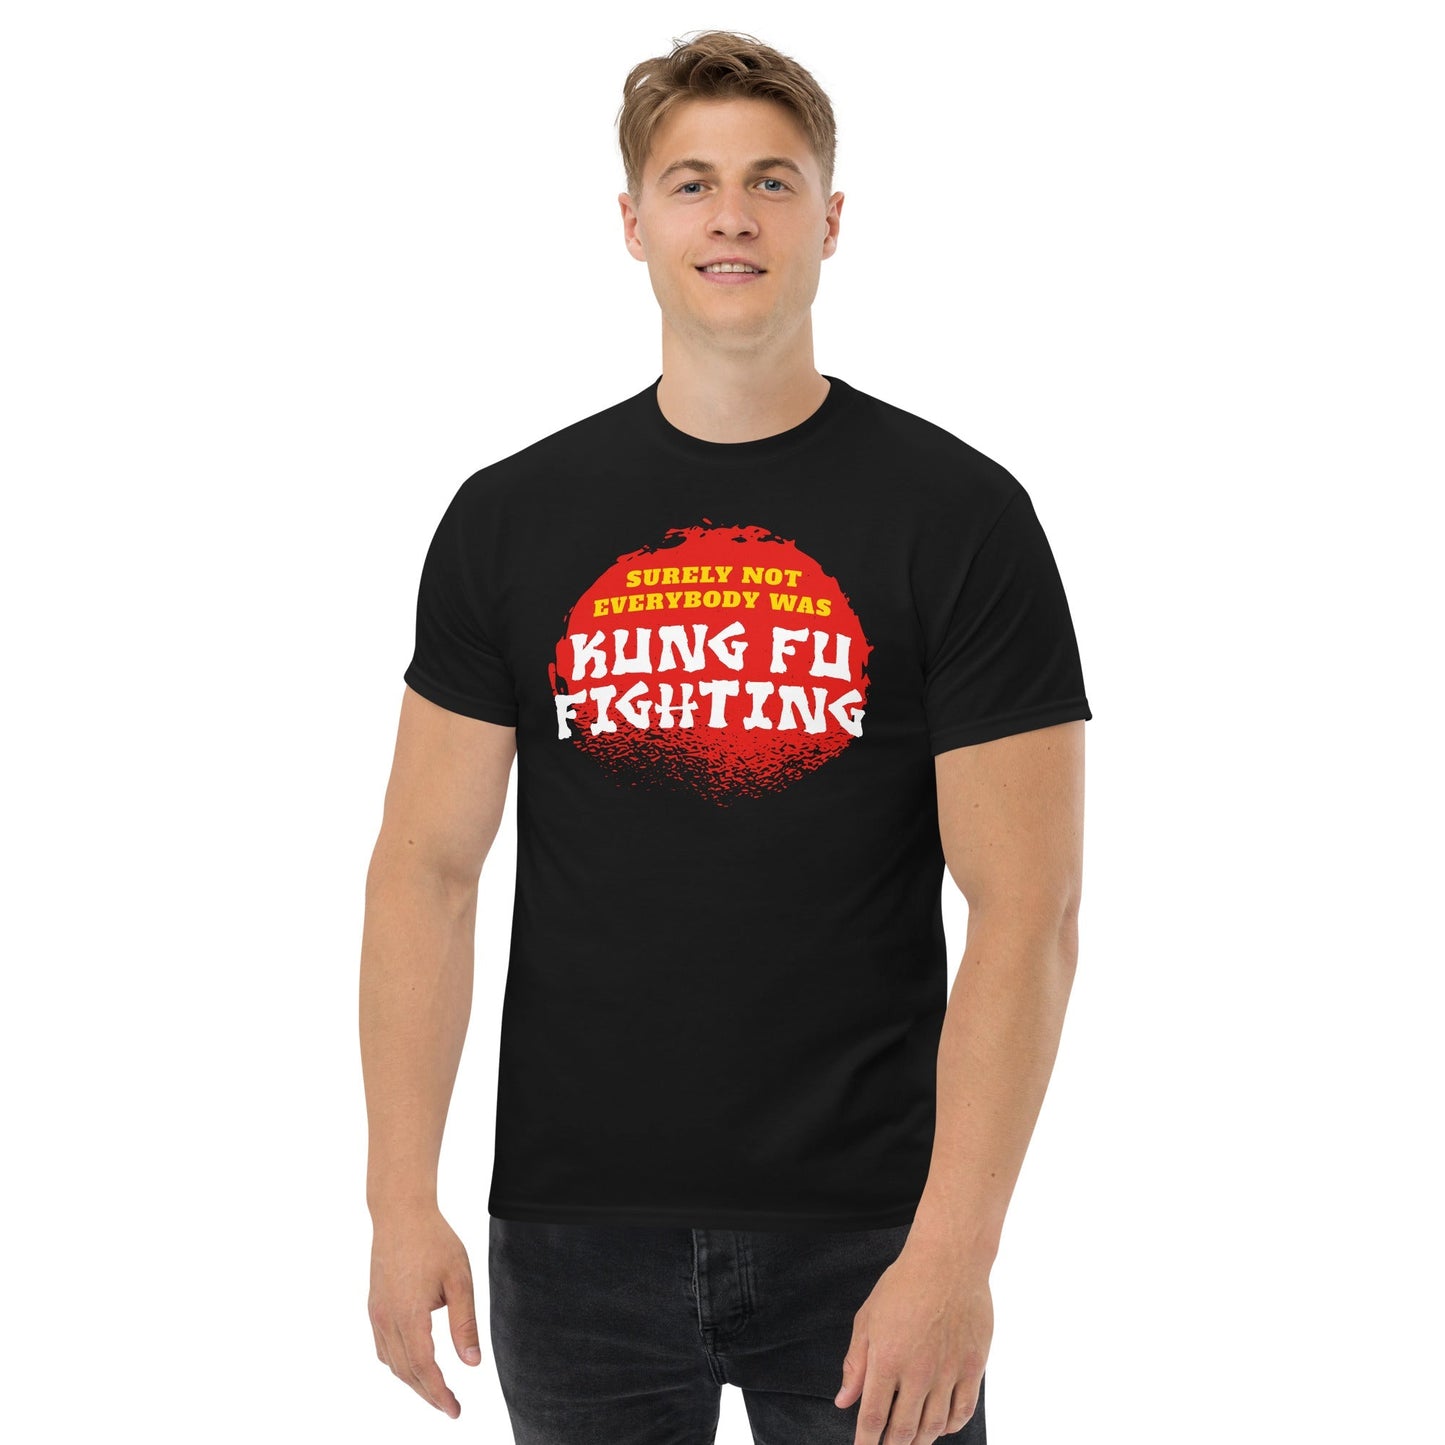 Surely not everybody was Kung Fu fighting - Plus-Sized T-Shirt